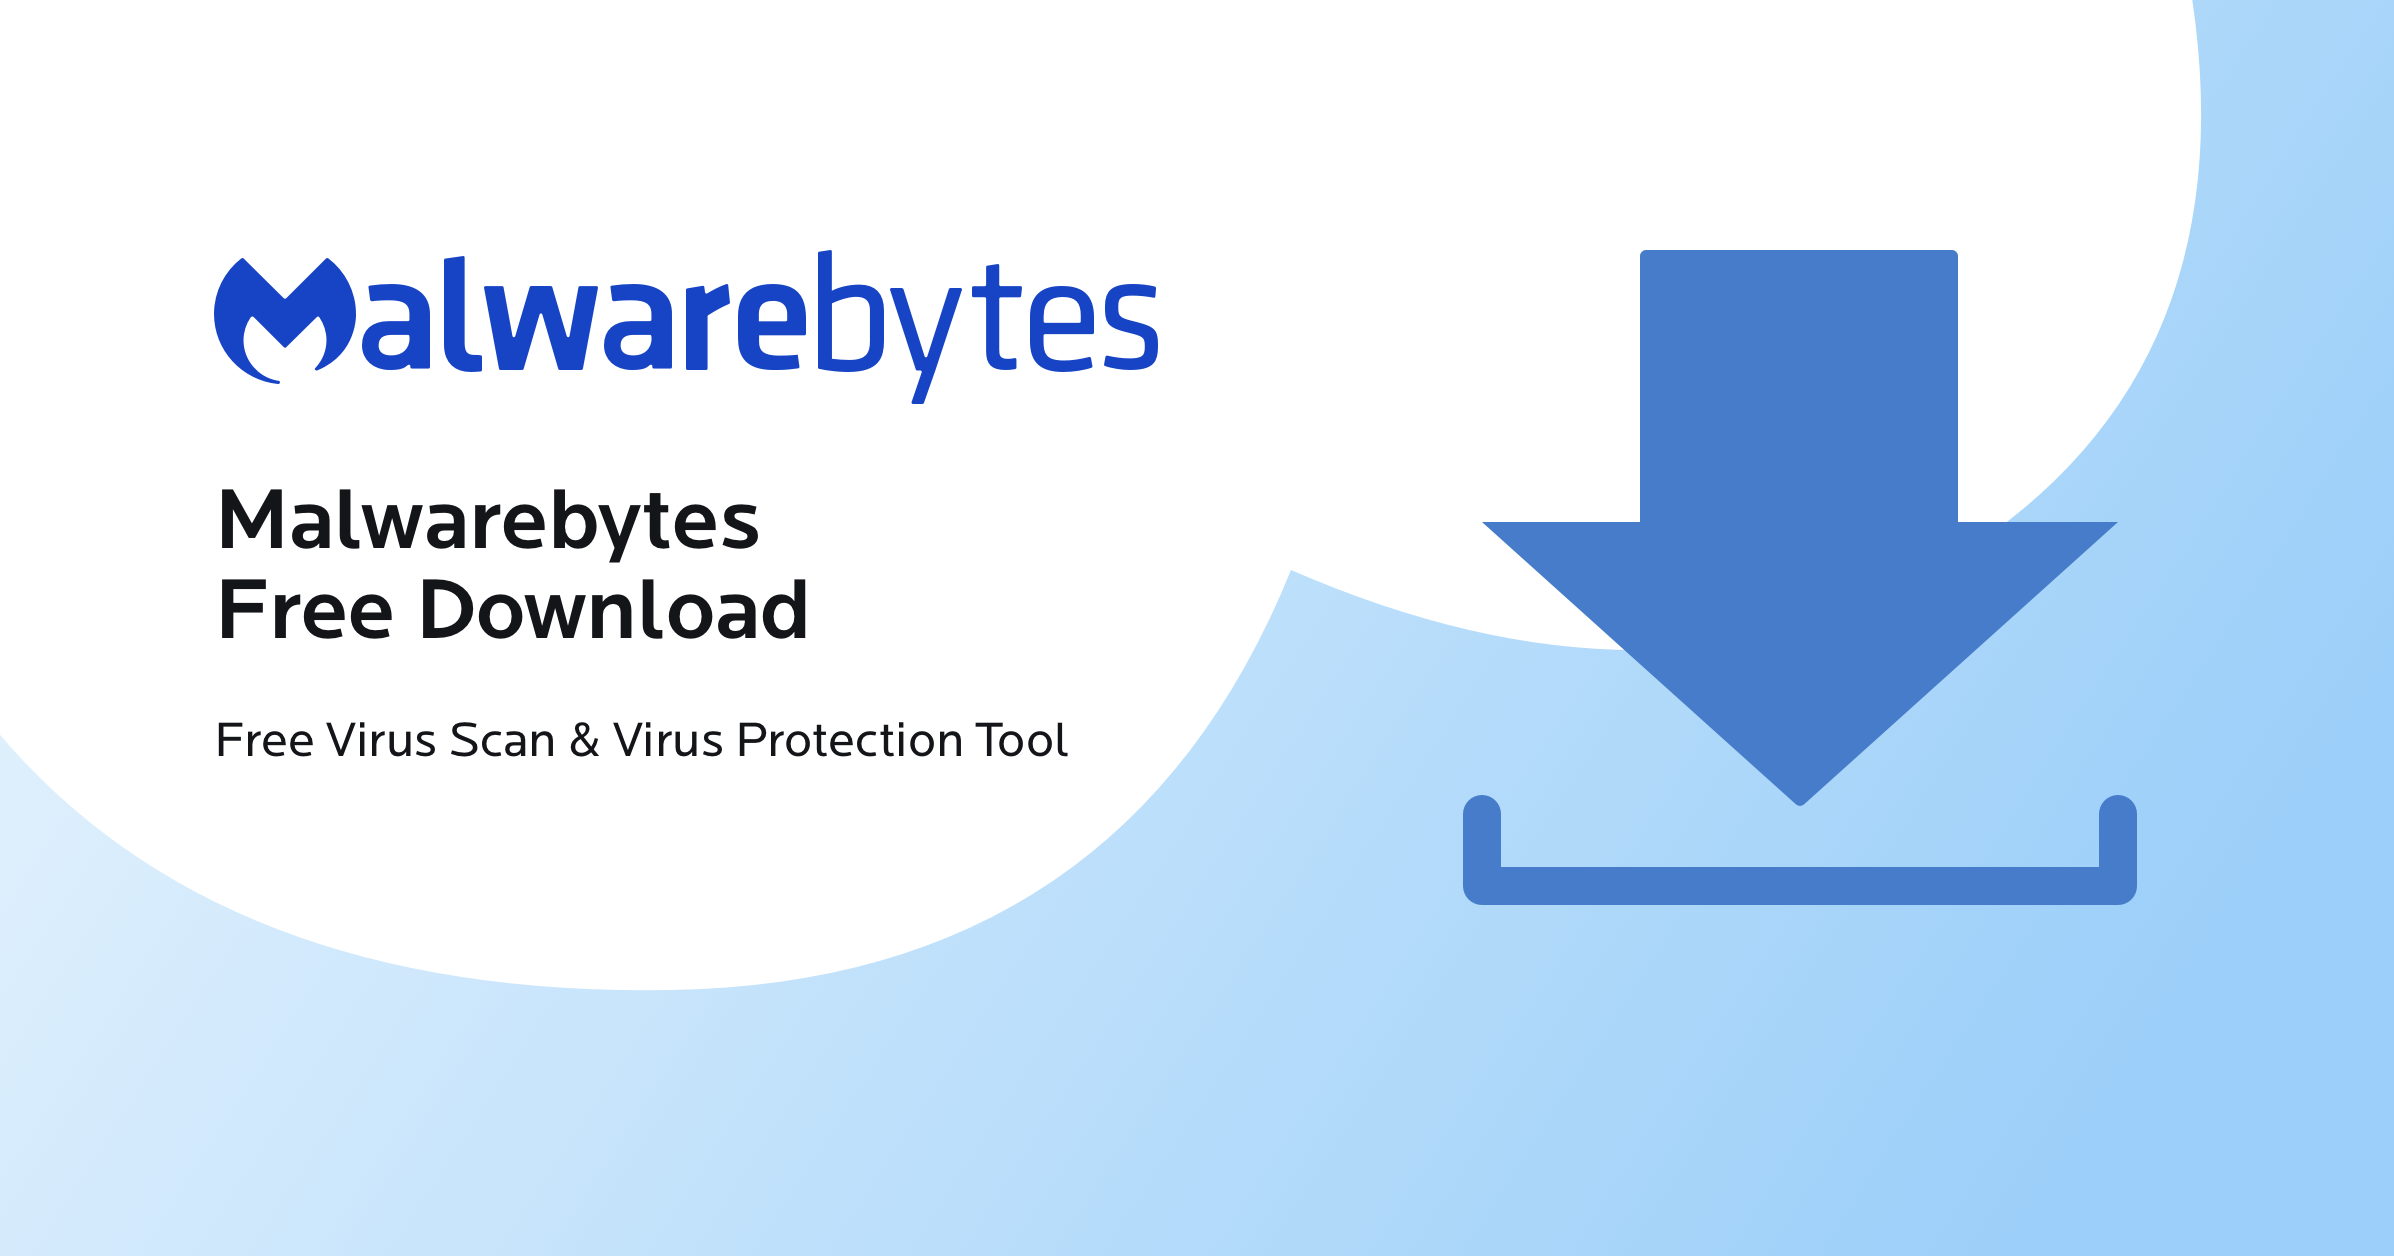 Download and install a reputable anti-malware program
Perform a full system scan